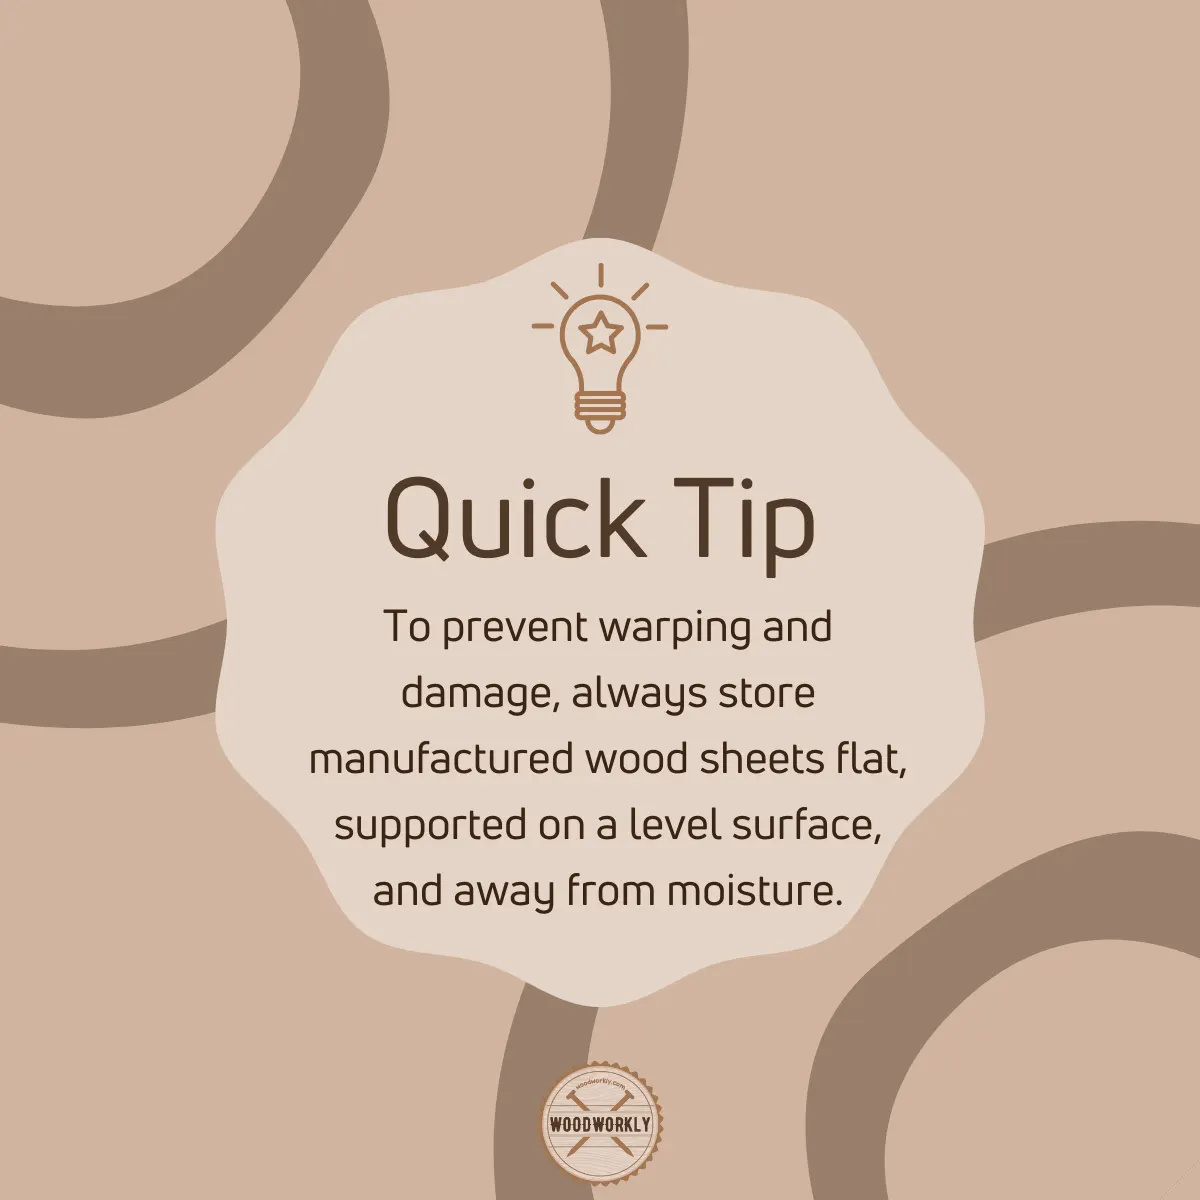 tip about manufactured wood